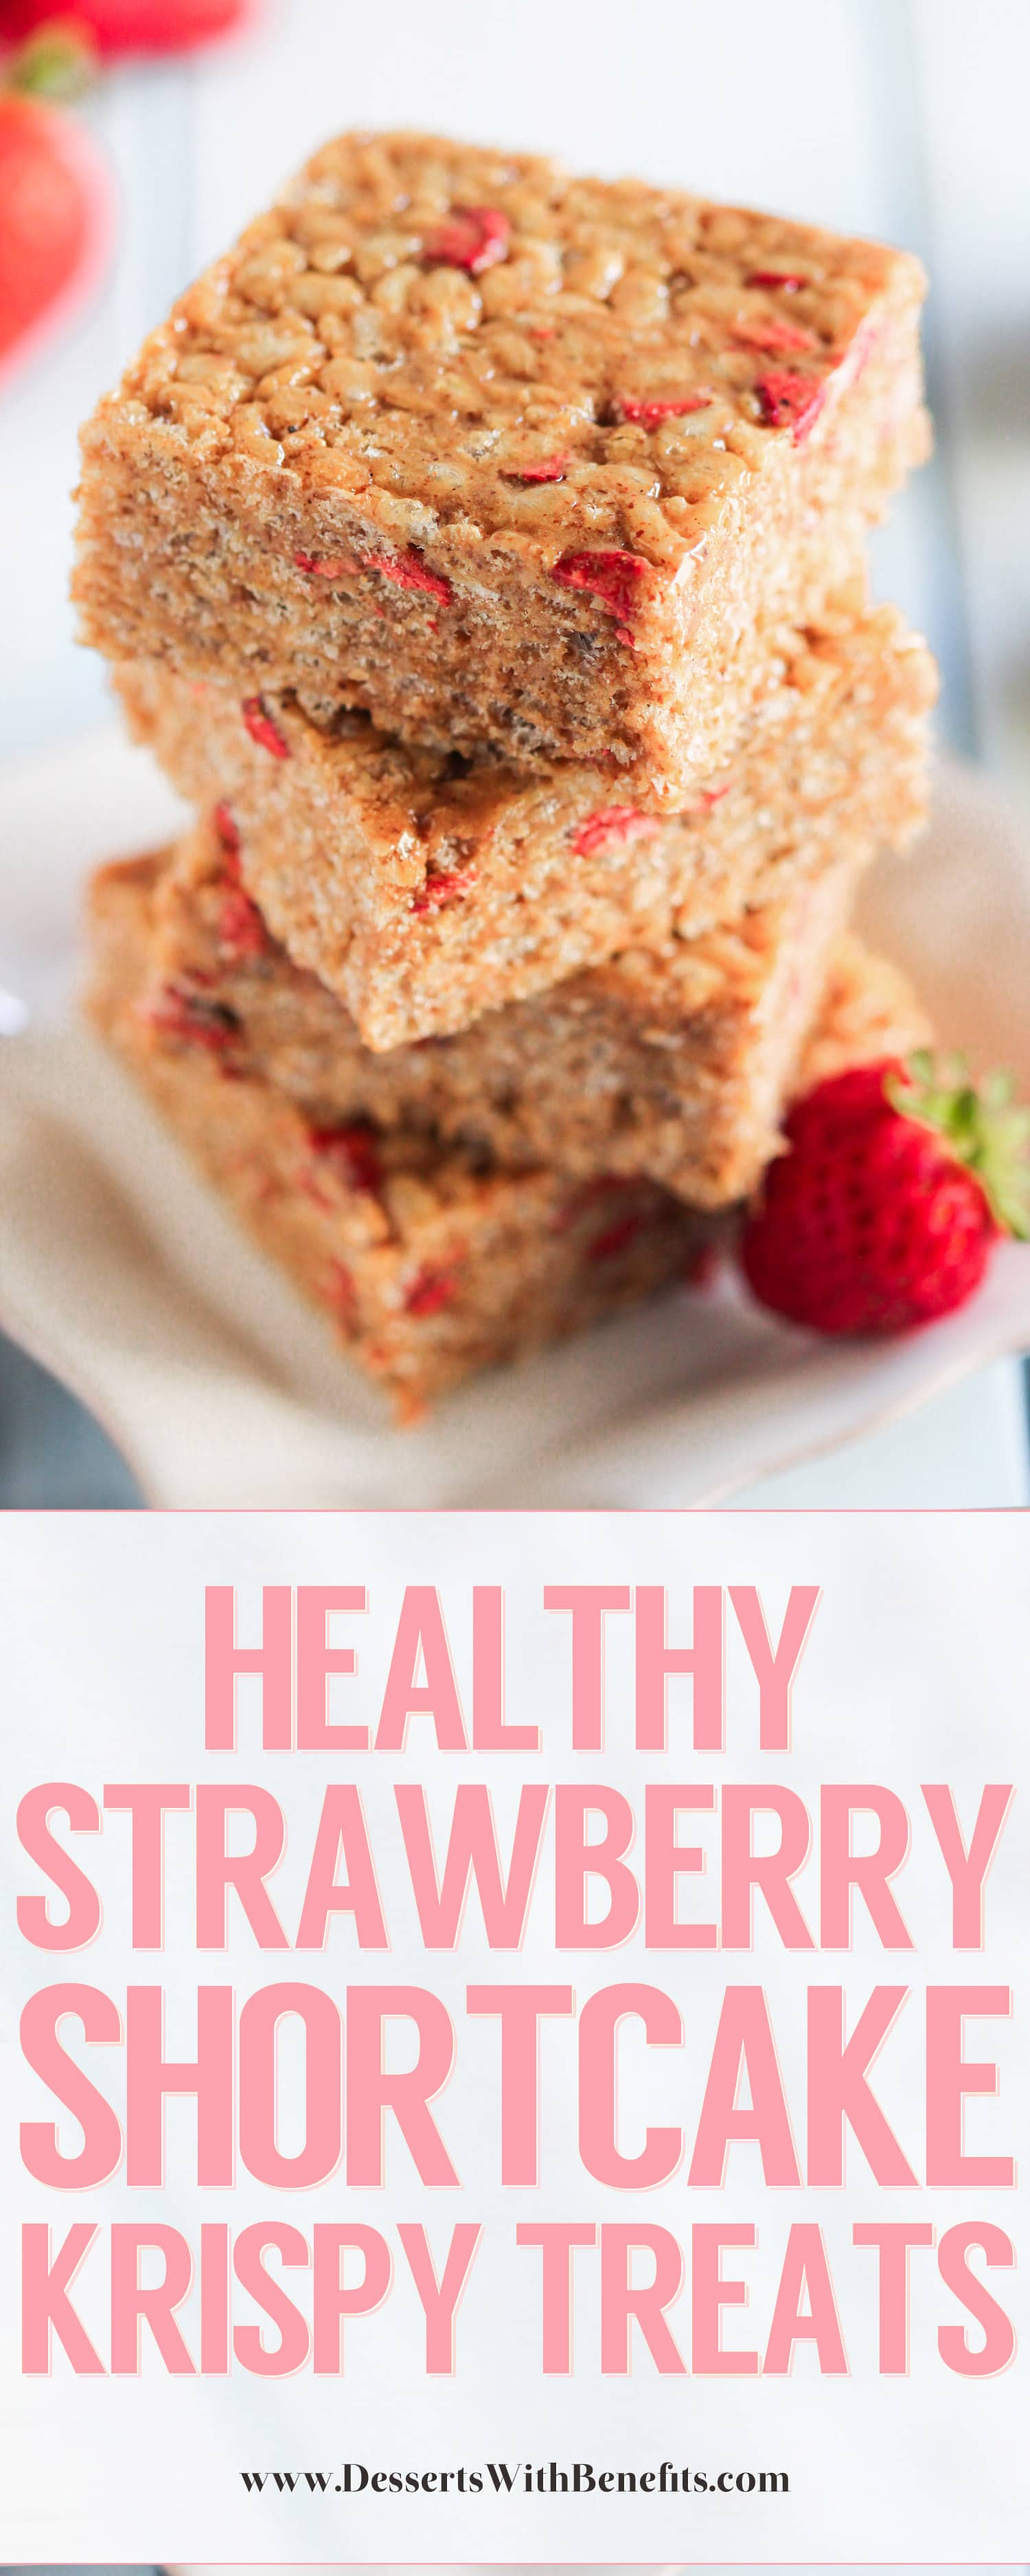 Healthy Strawberry Shortcake Krispy Treats (refined sugar free, high protein, and gluten free, with a vegan option)!